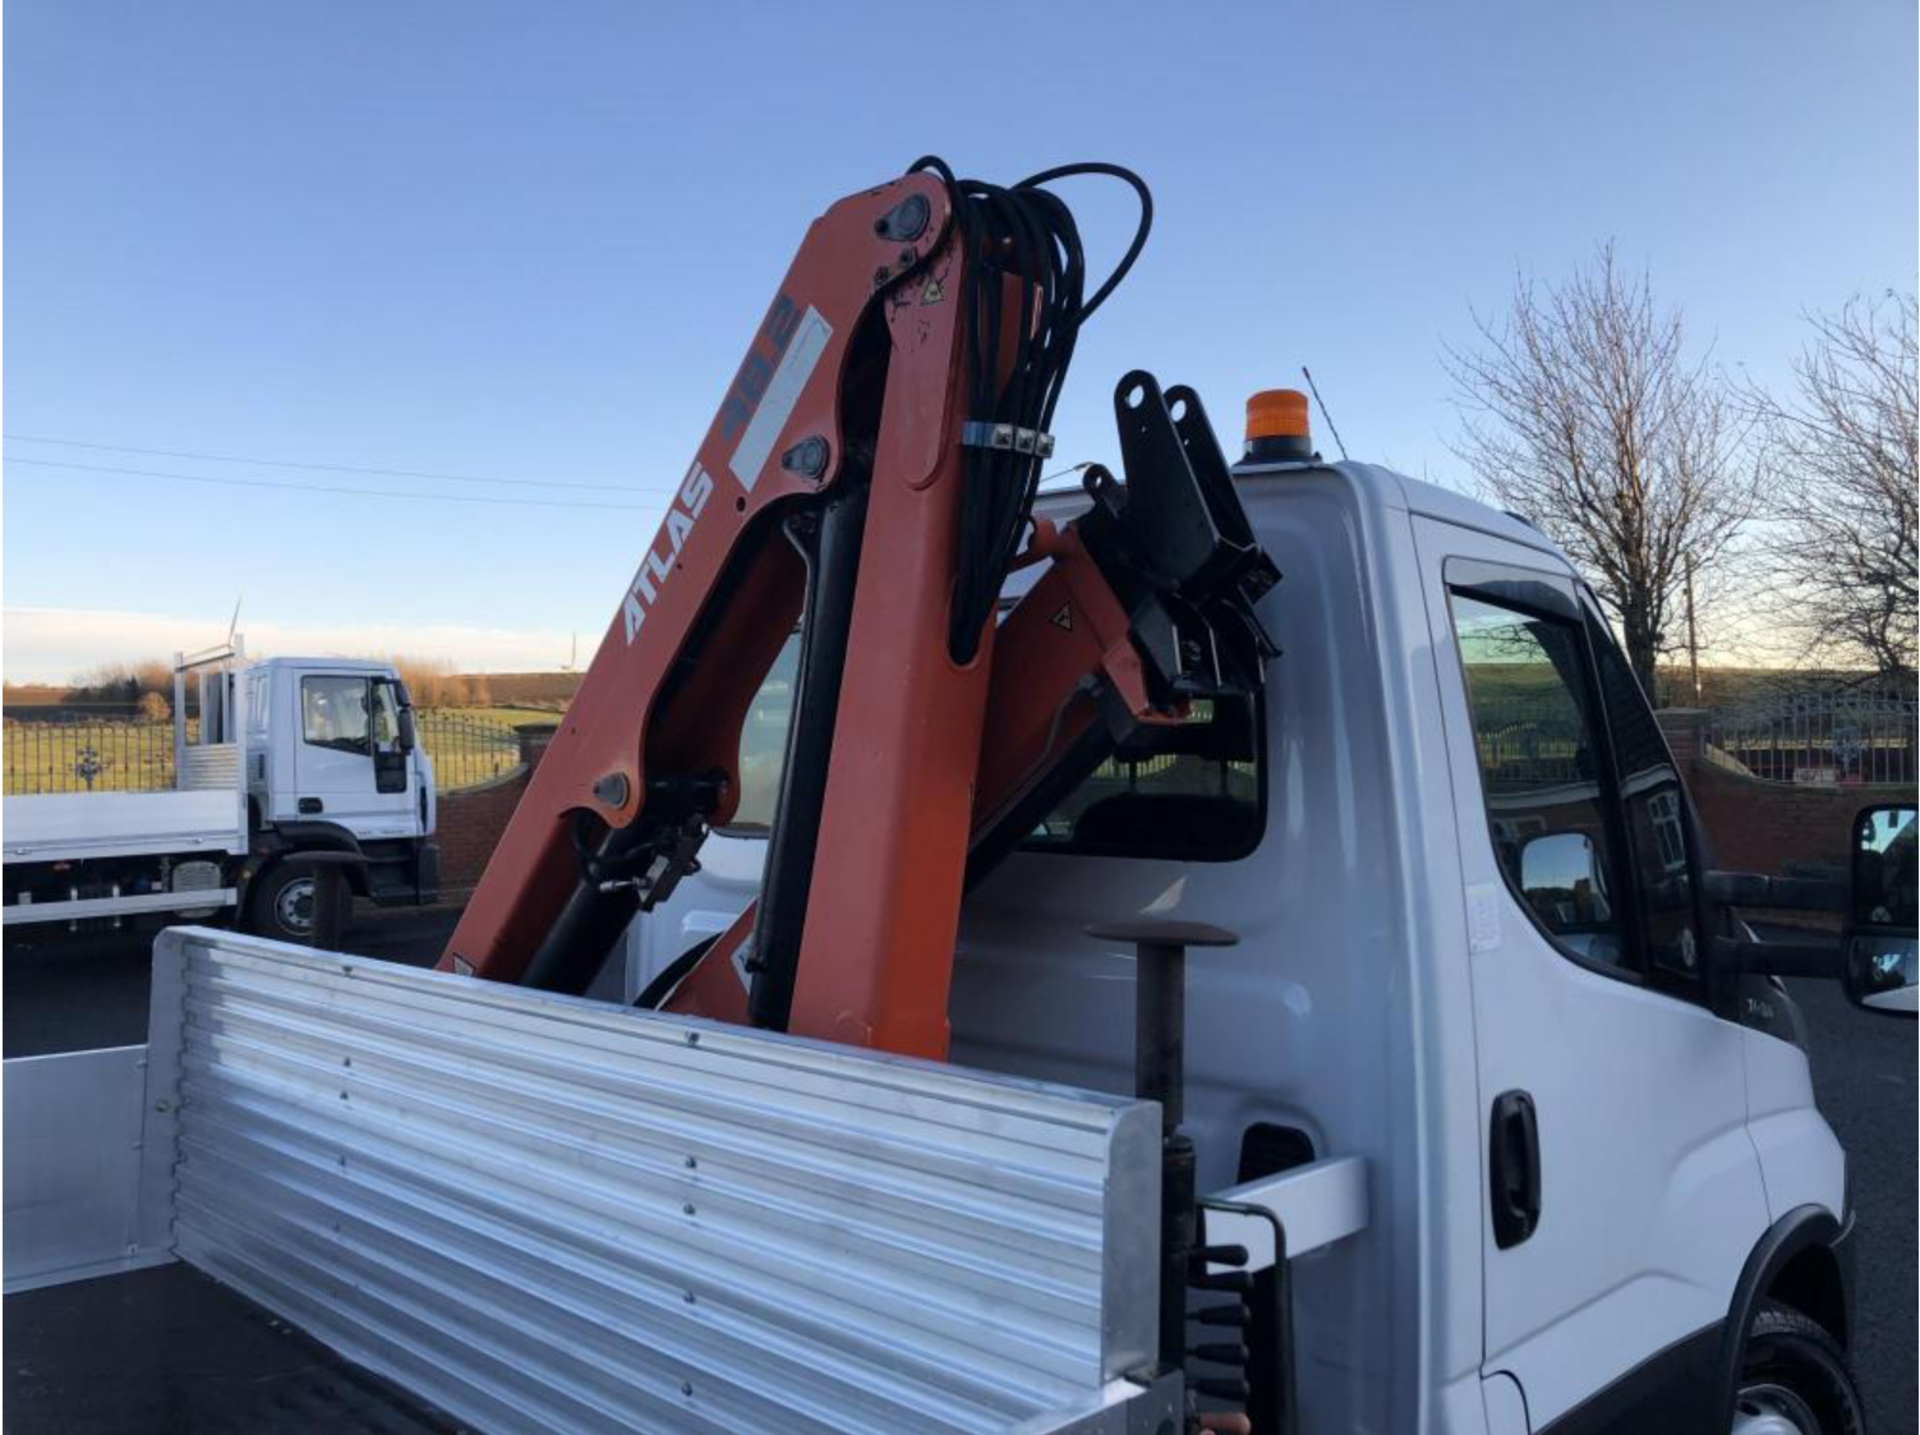 2014/ 64 PLATE IVECO DAILY 70-170 7TON GROSS, DROP SIDE BODY WITH ATLAS TEREX 48.2 CRANE *PLUS VAT* - Image 7 of 16